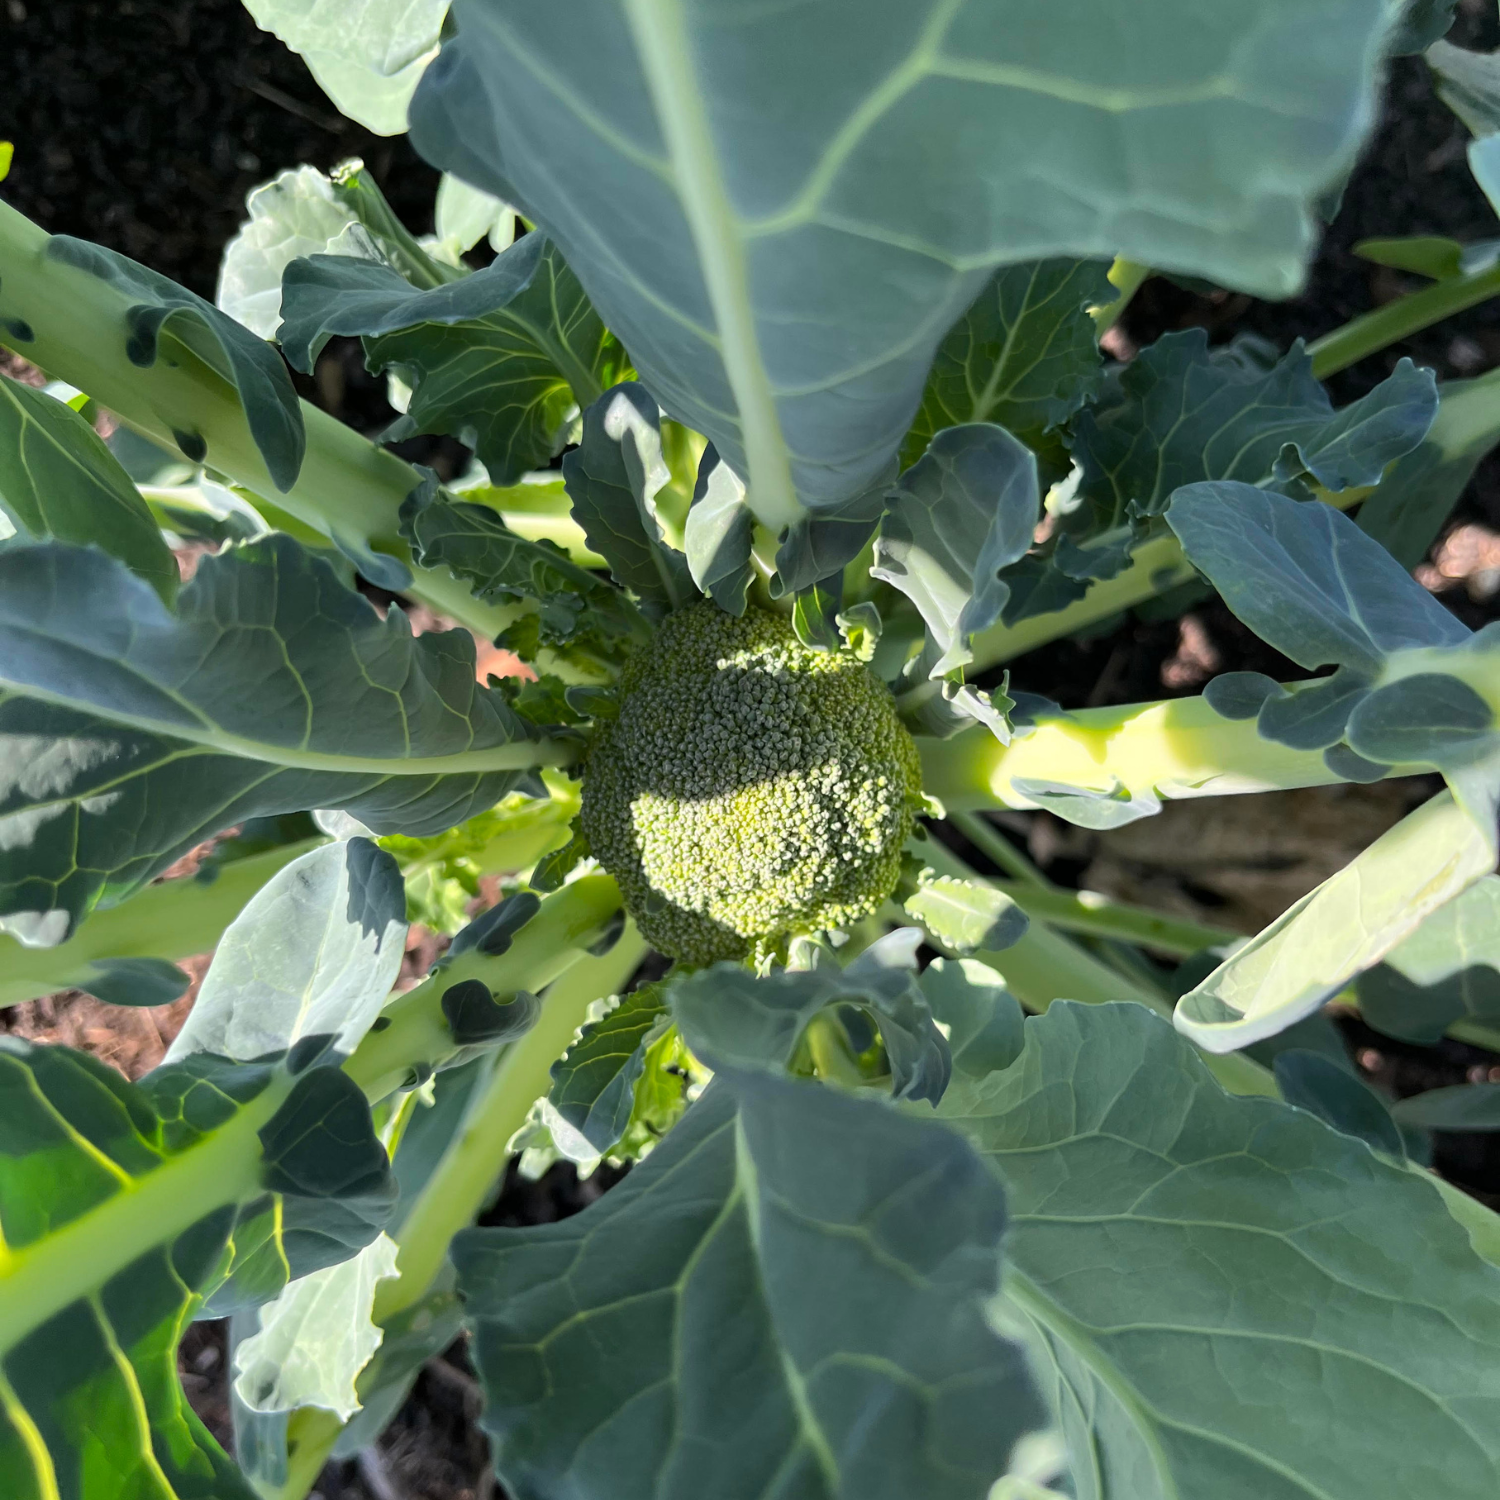 Broccoli and more on the way...